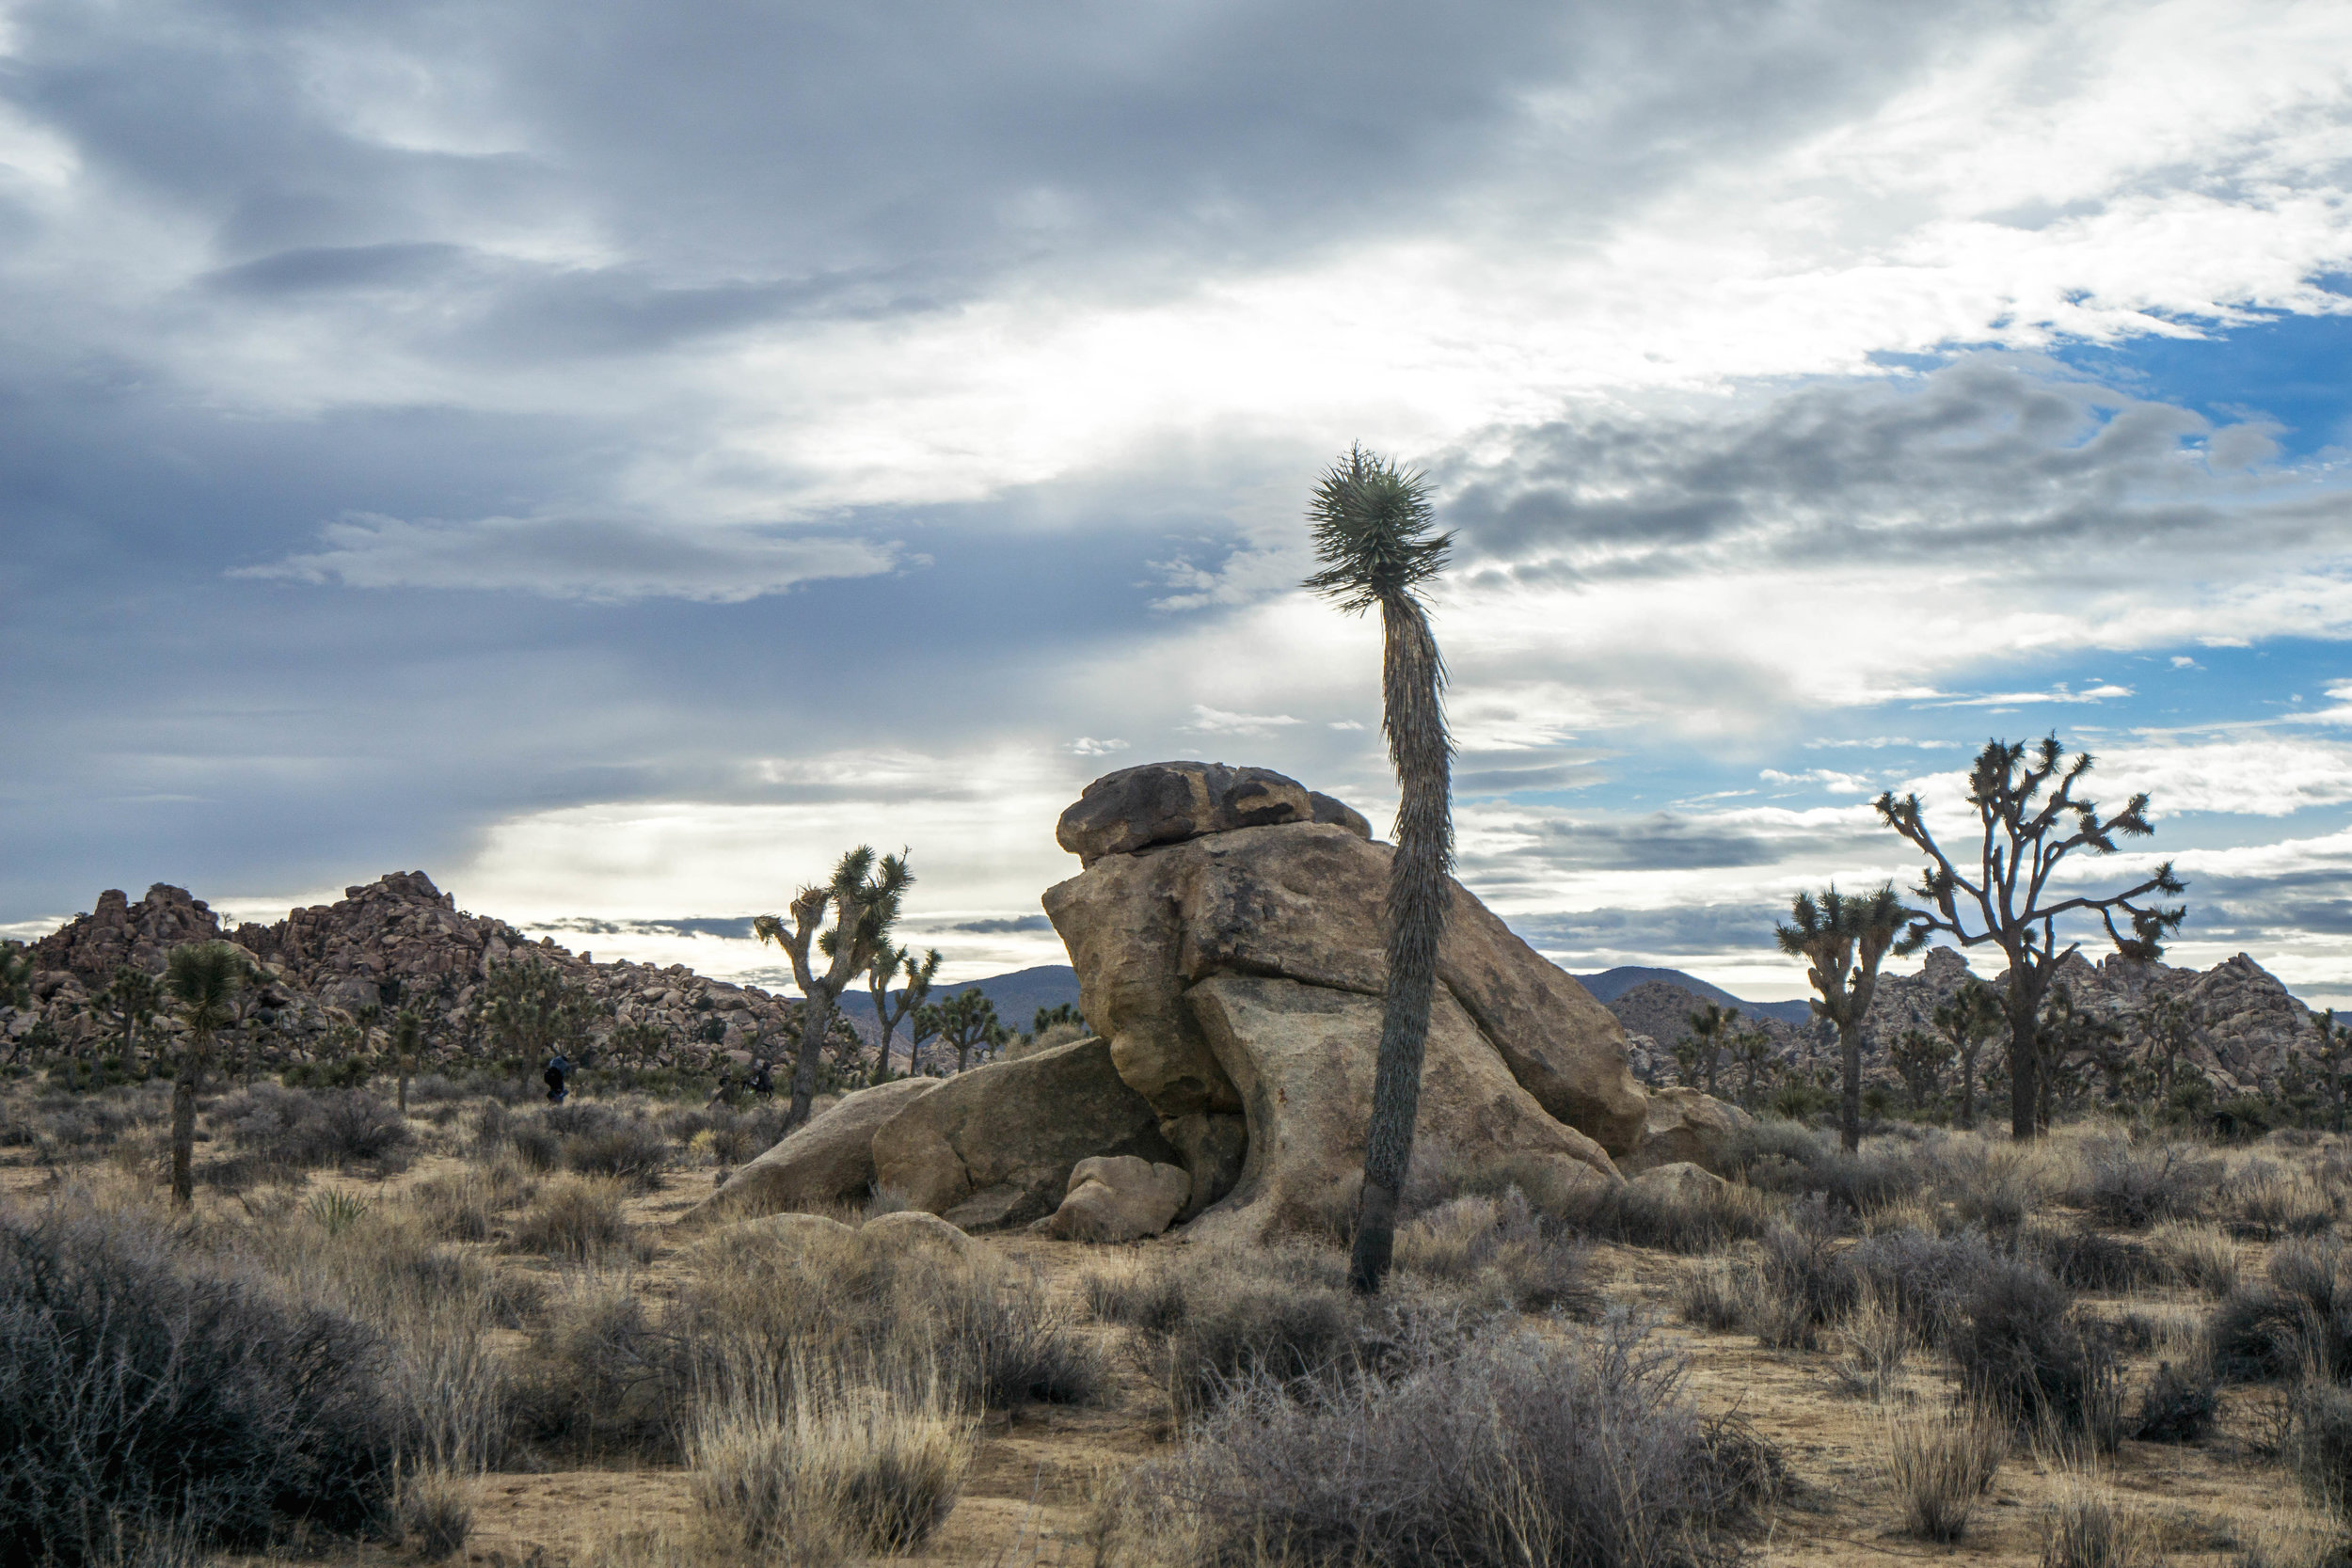 Alien looking branchless Joshua Trees are in the early stages of development, usually no more than a few decades old.